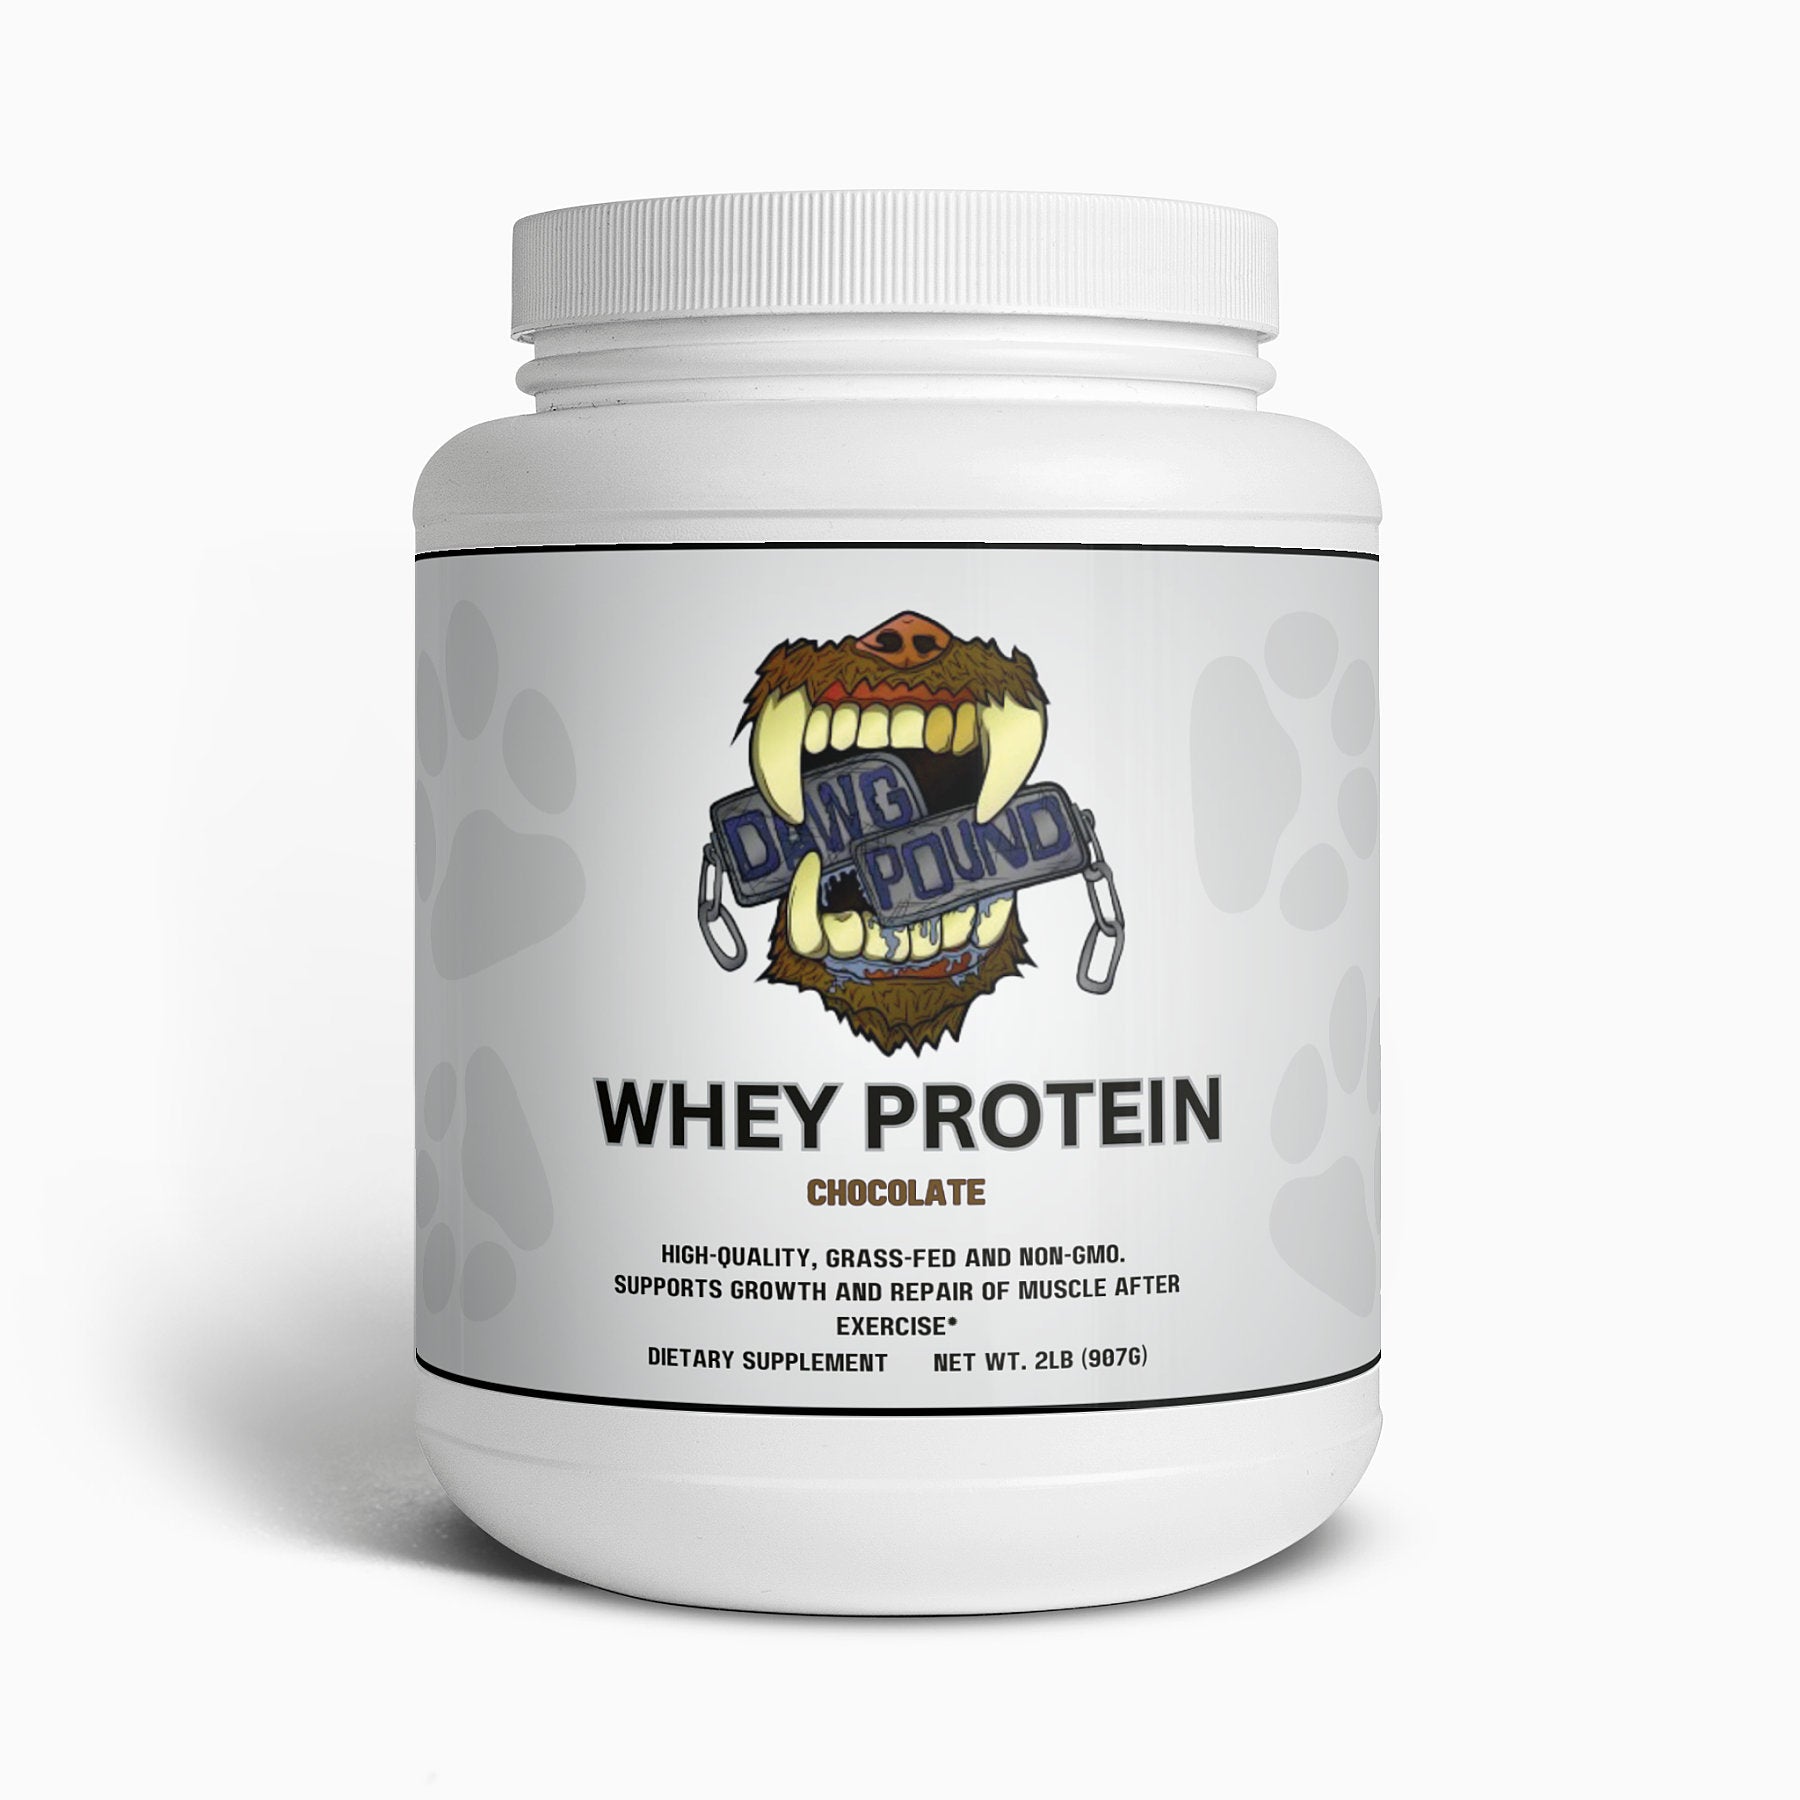 Dawg Pound Grass-Fed Protein - Chocolate Flavor - Front View